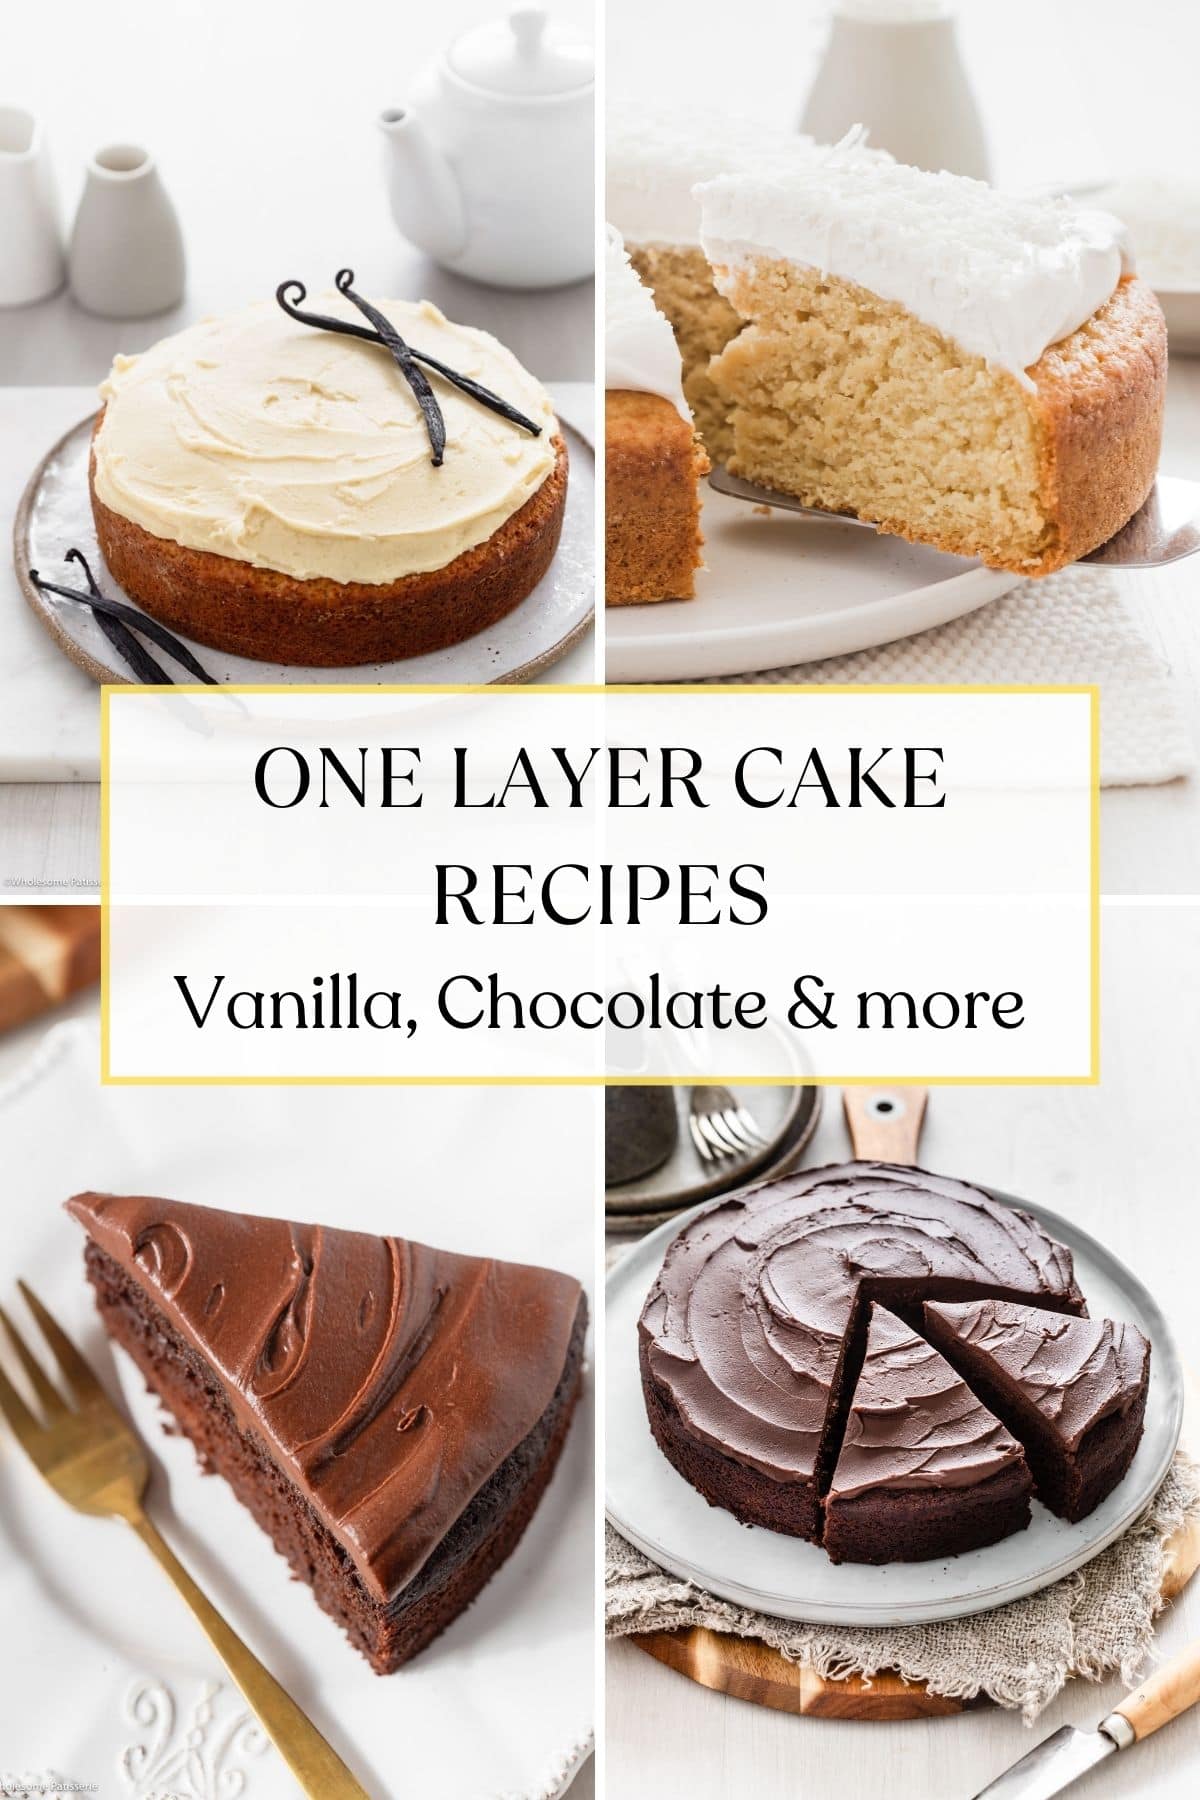 One layer cake recipes.